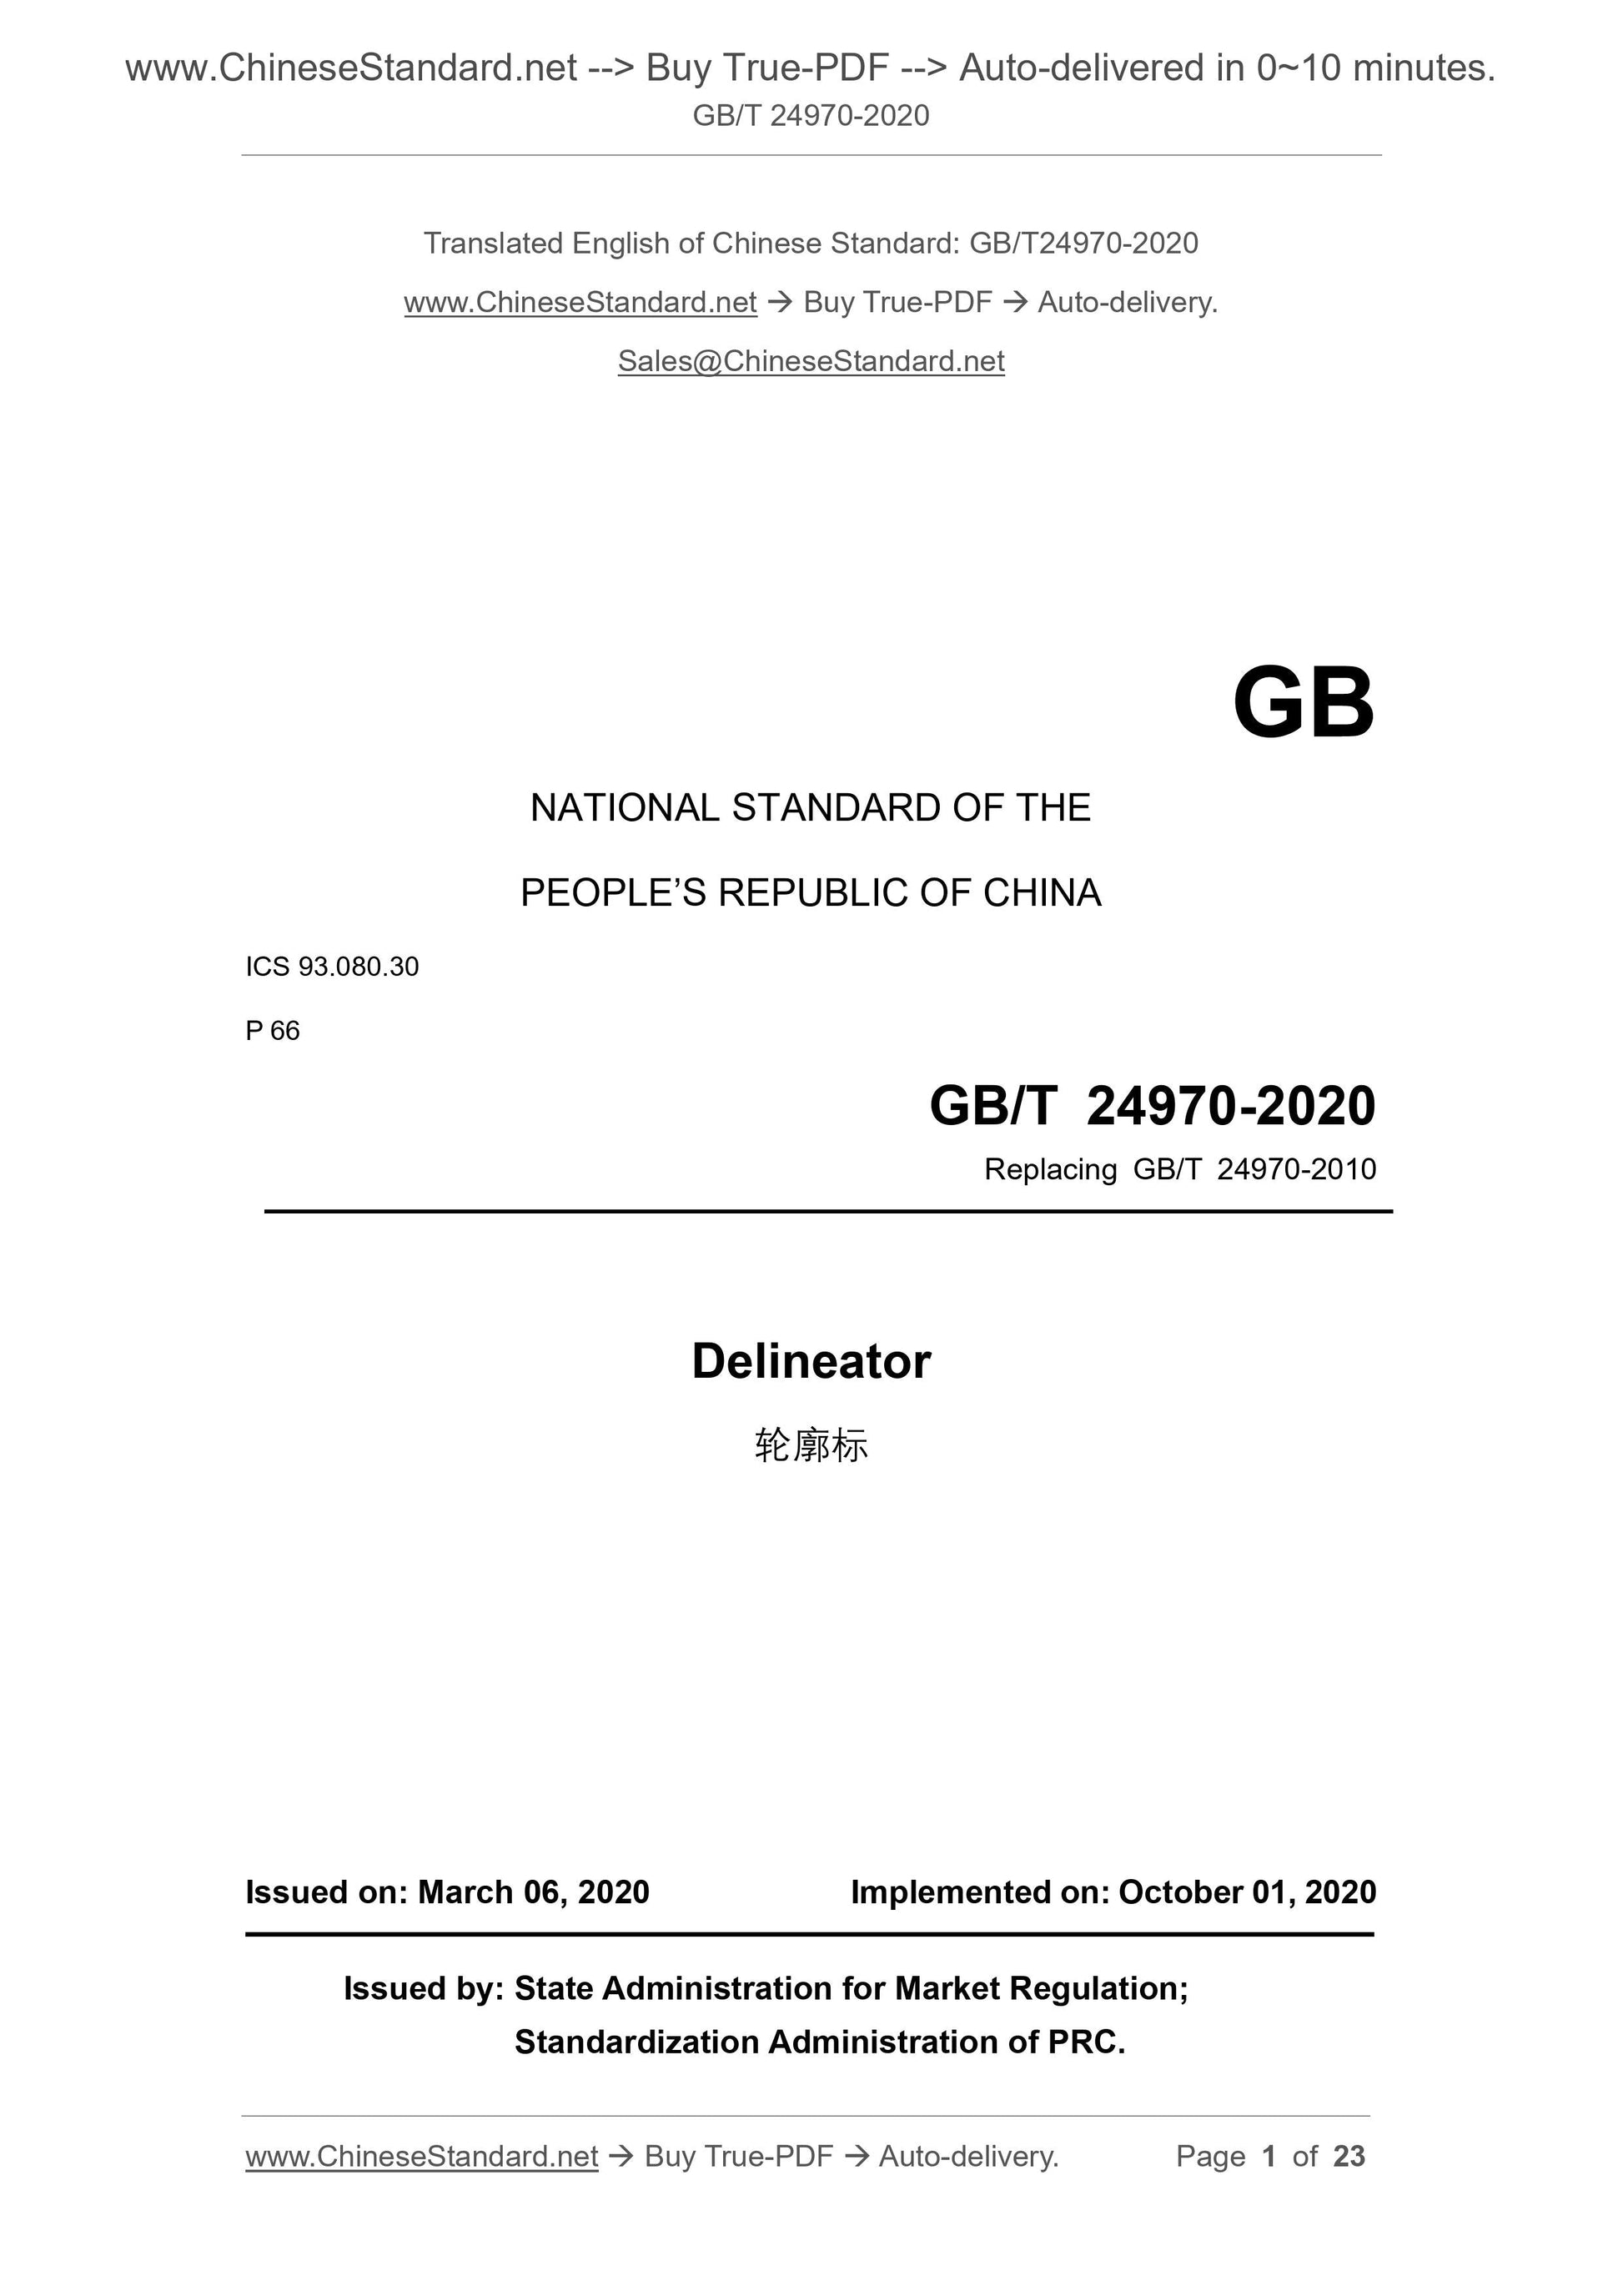 GB/T 24970-2020 Page 1